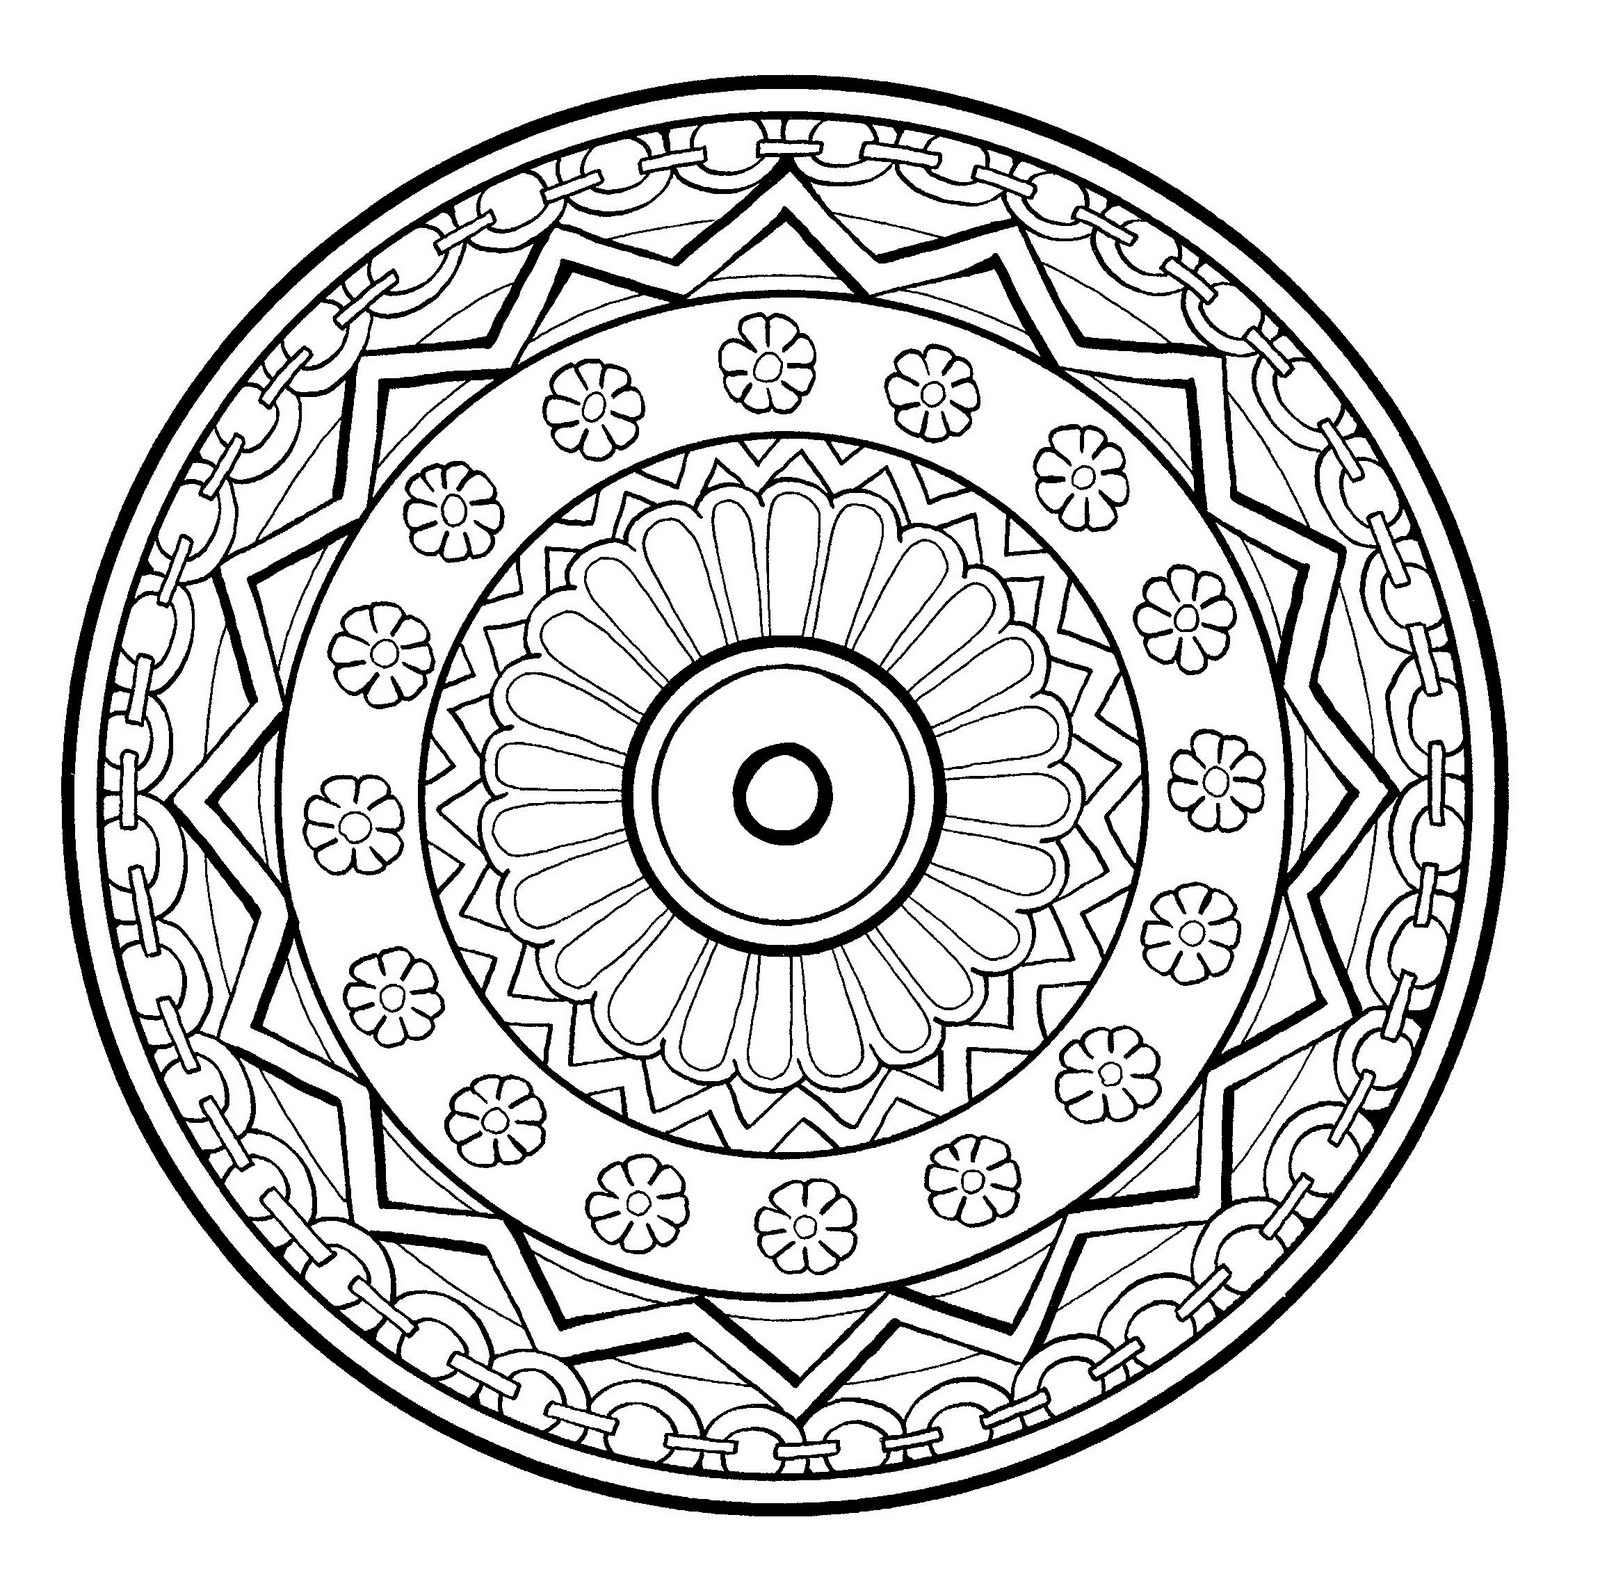 Mandala drawing of normal difficulty level, with flowers and abstract patterns. Very well drawn